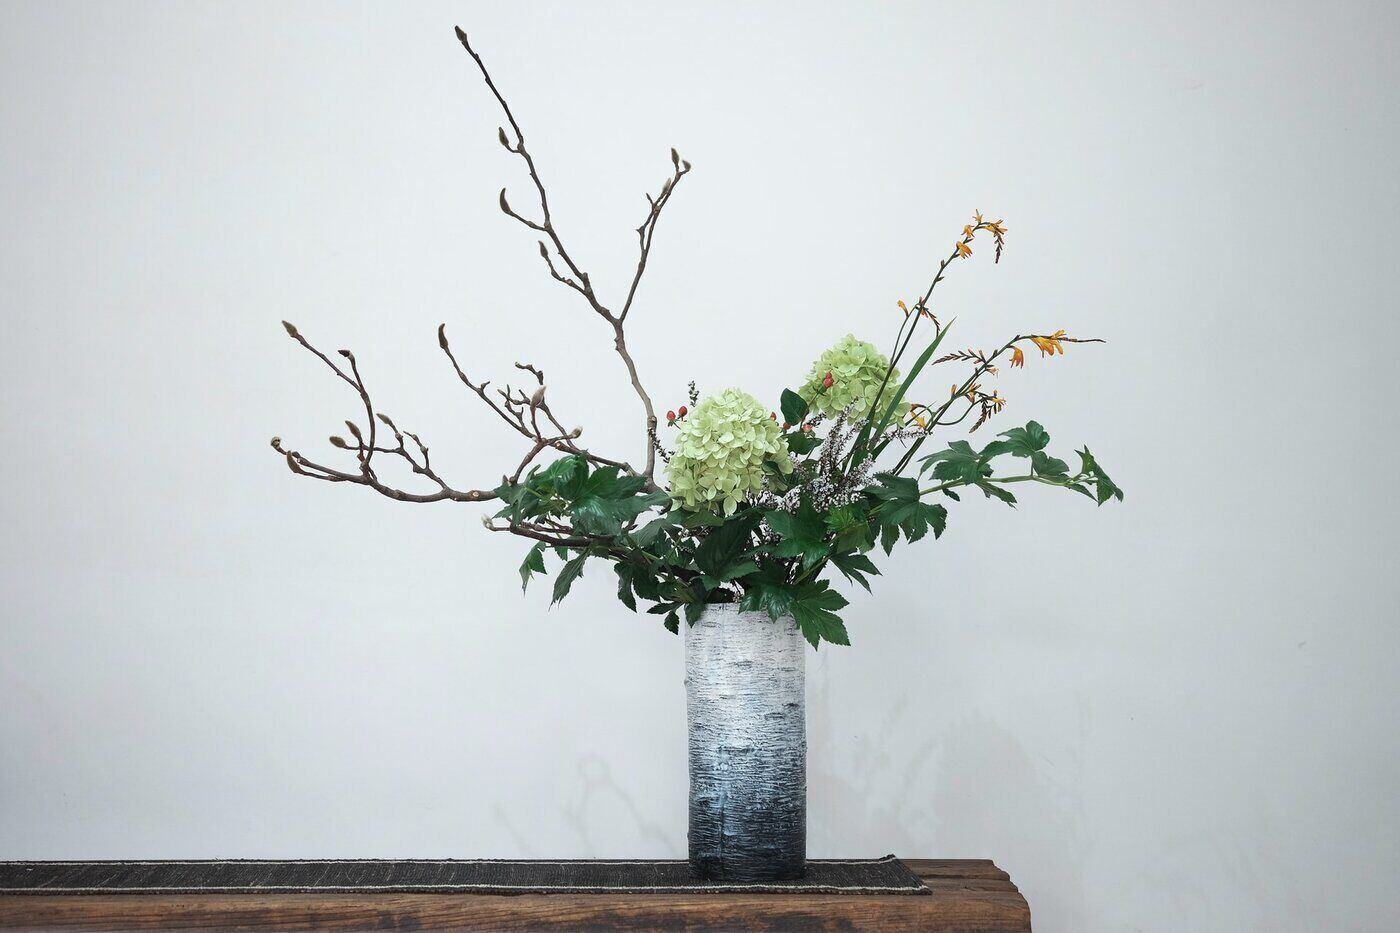 flowers and twigs in vase - principles of floral design